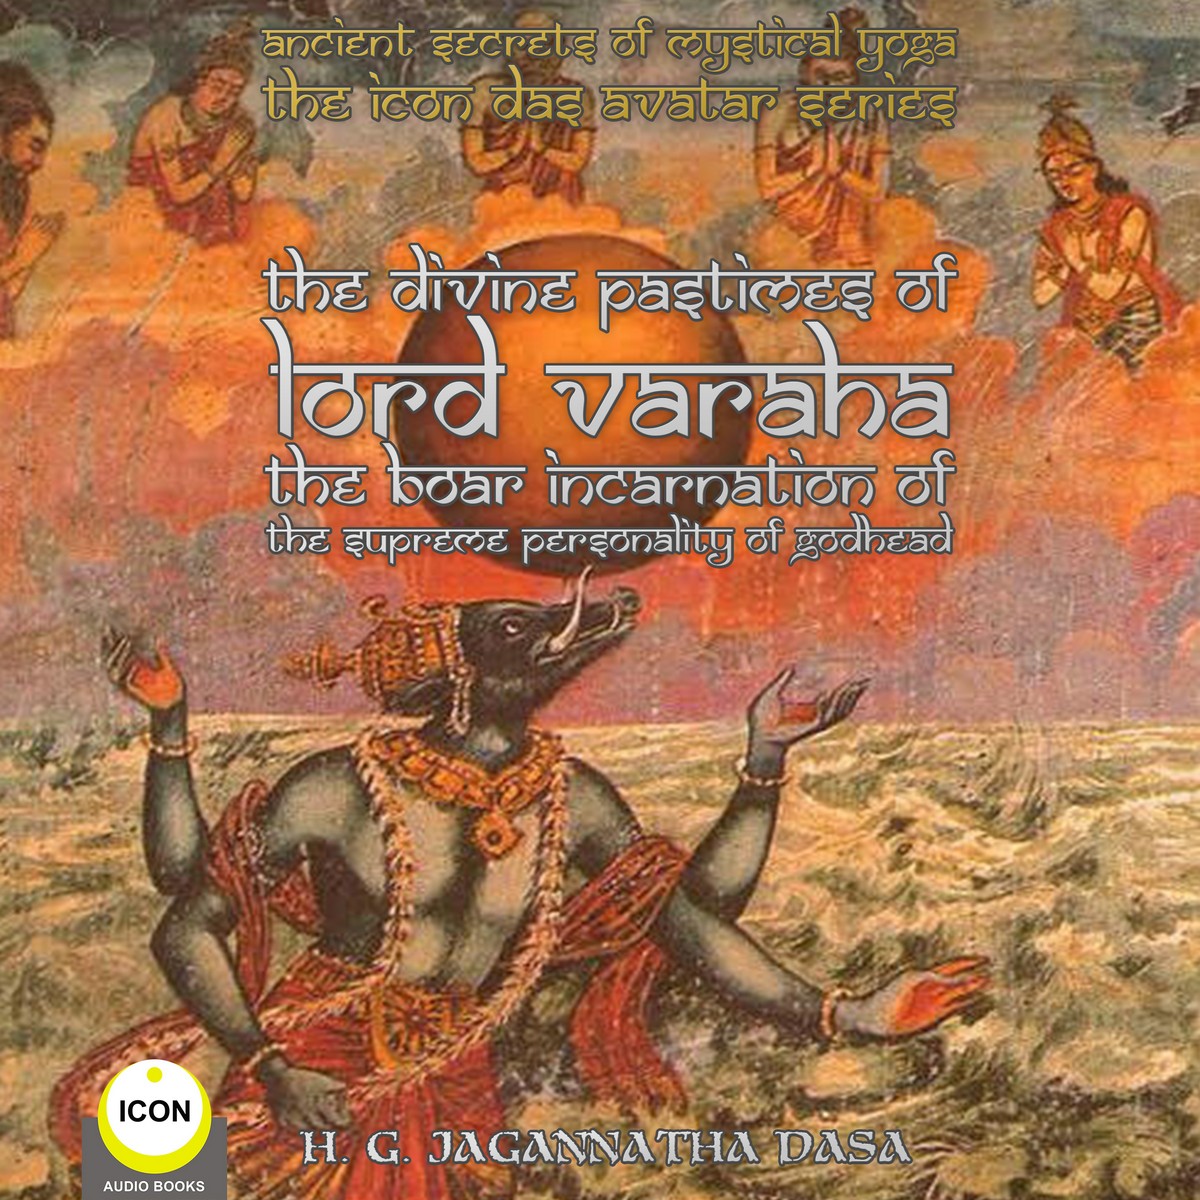 Ancient Secrets of Mystical Yoga – The Icon Das Avatar Series: The Divine Pastimes Of Lord Varaha – The Boar Incarnation Of The Supreme Personality Of Godhead.